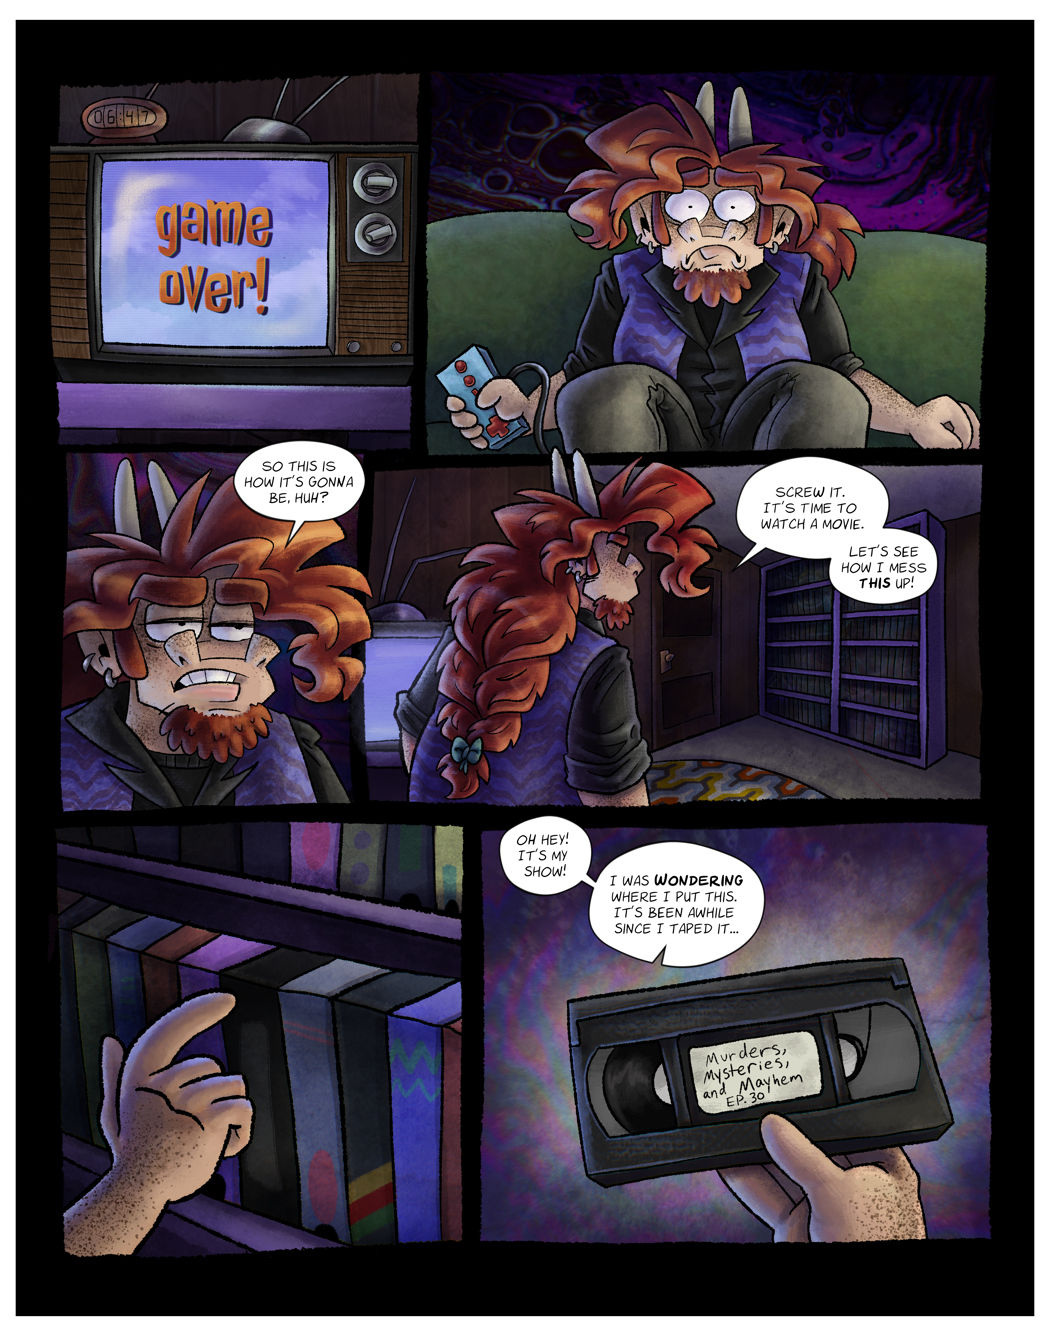 Ch 3 page 11: Back to Square One